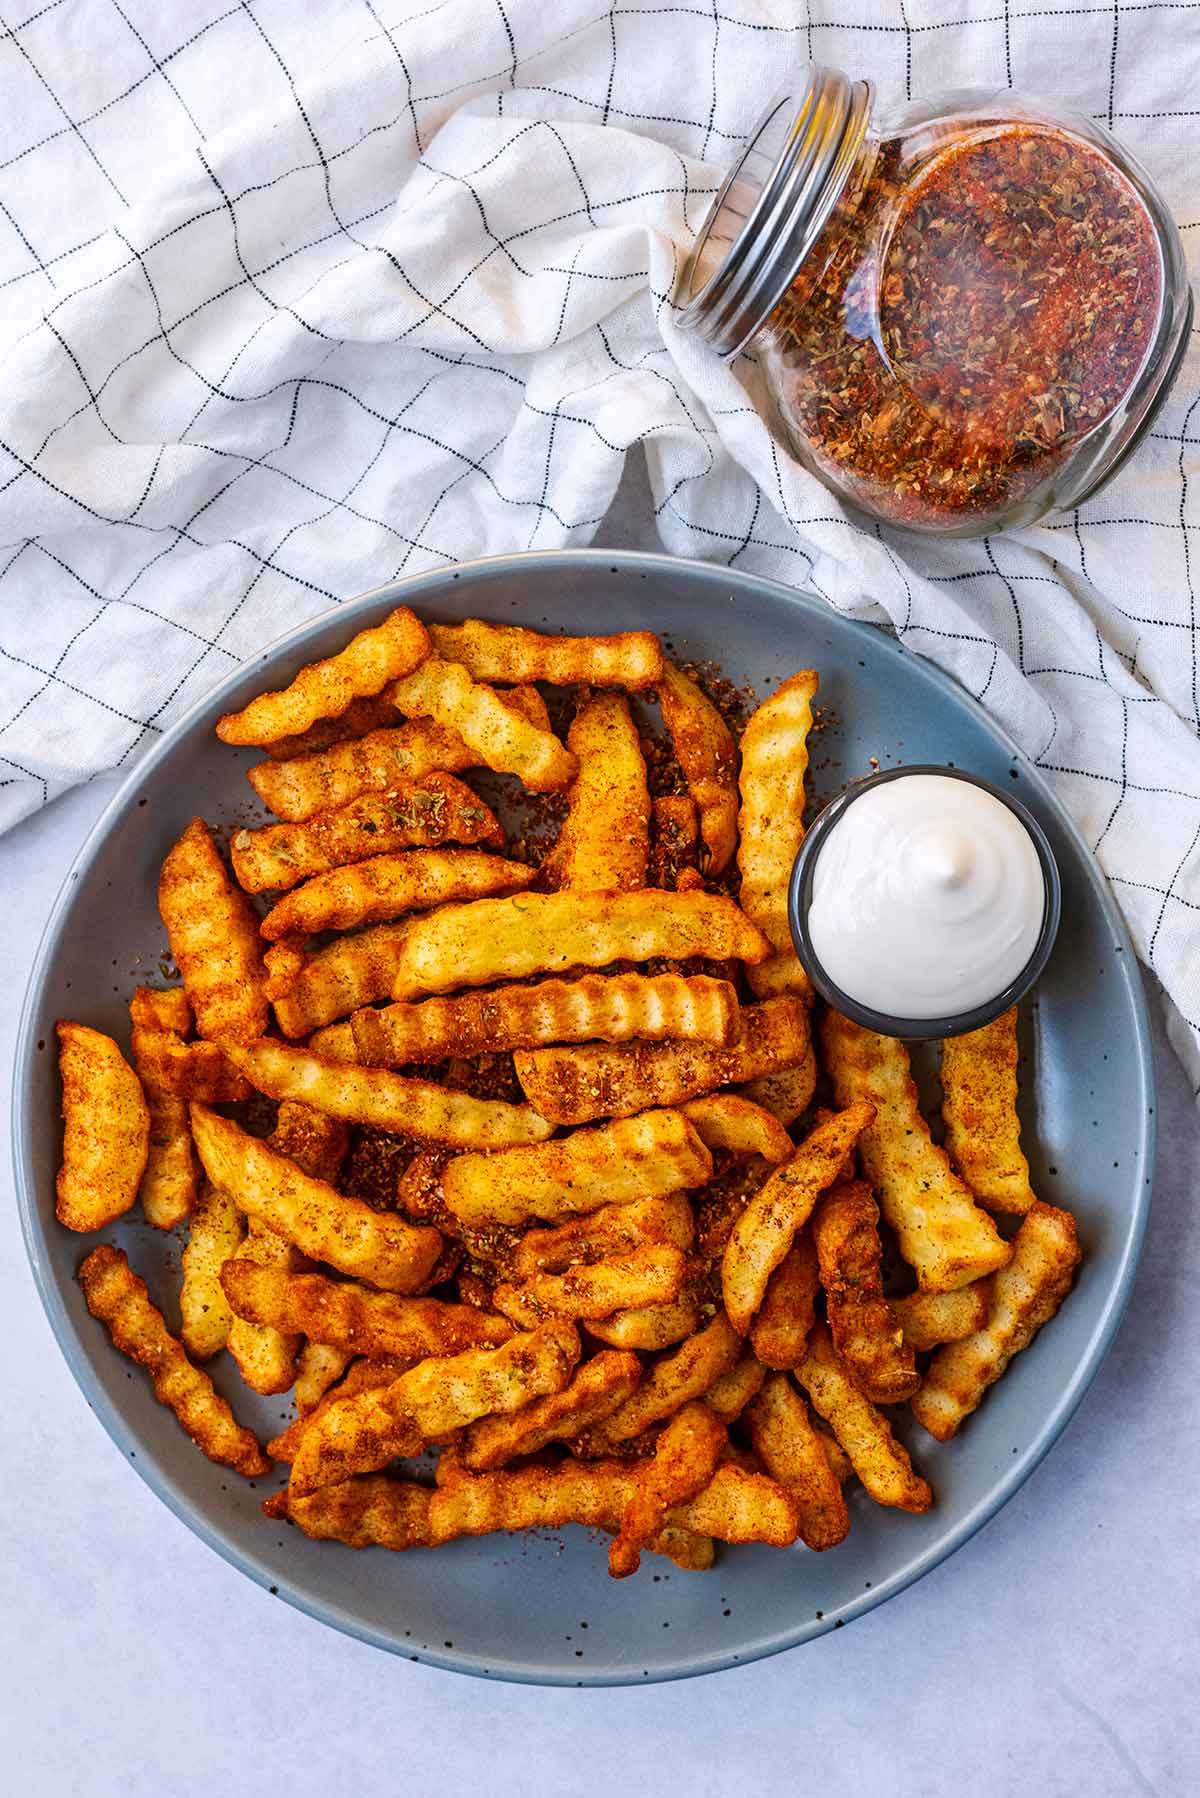 A plate of seasoned chips next to a towel and a jar of seasoning.